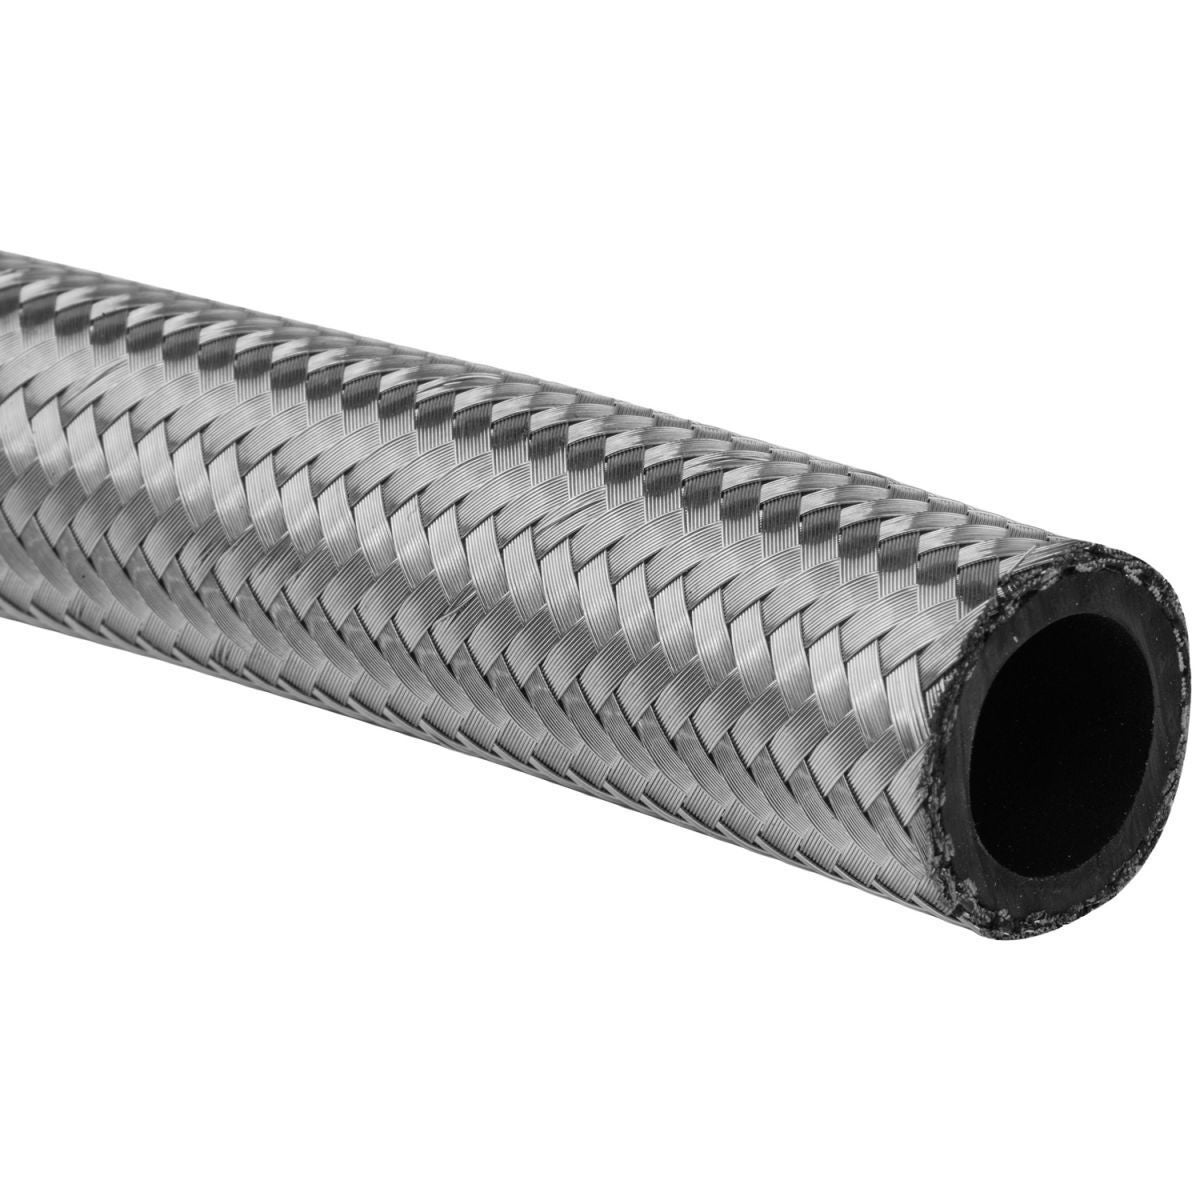 Proflow Stainless Braided Hose -12AN 1 Metre Length PFE100-12R-1